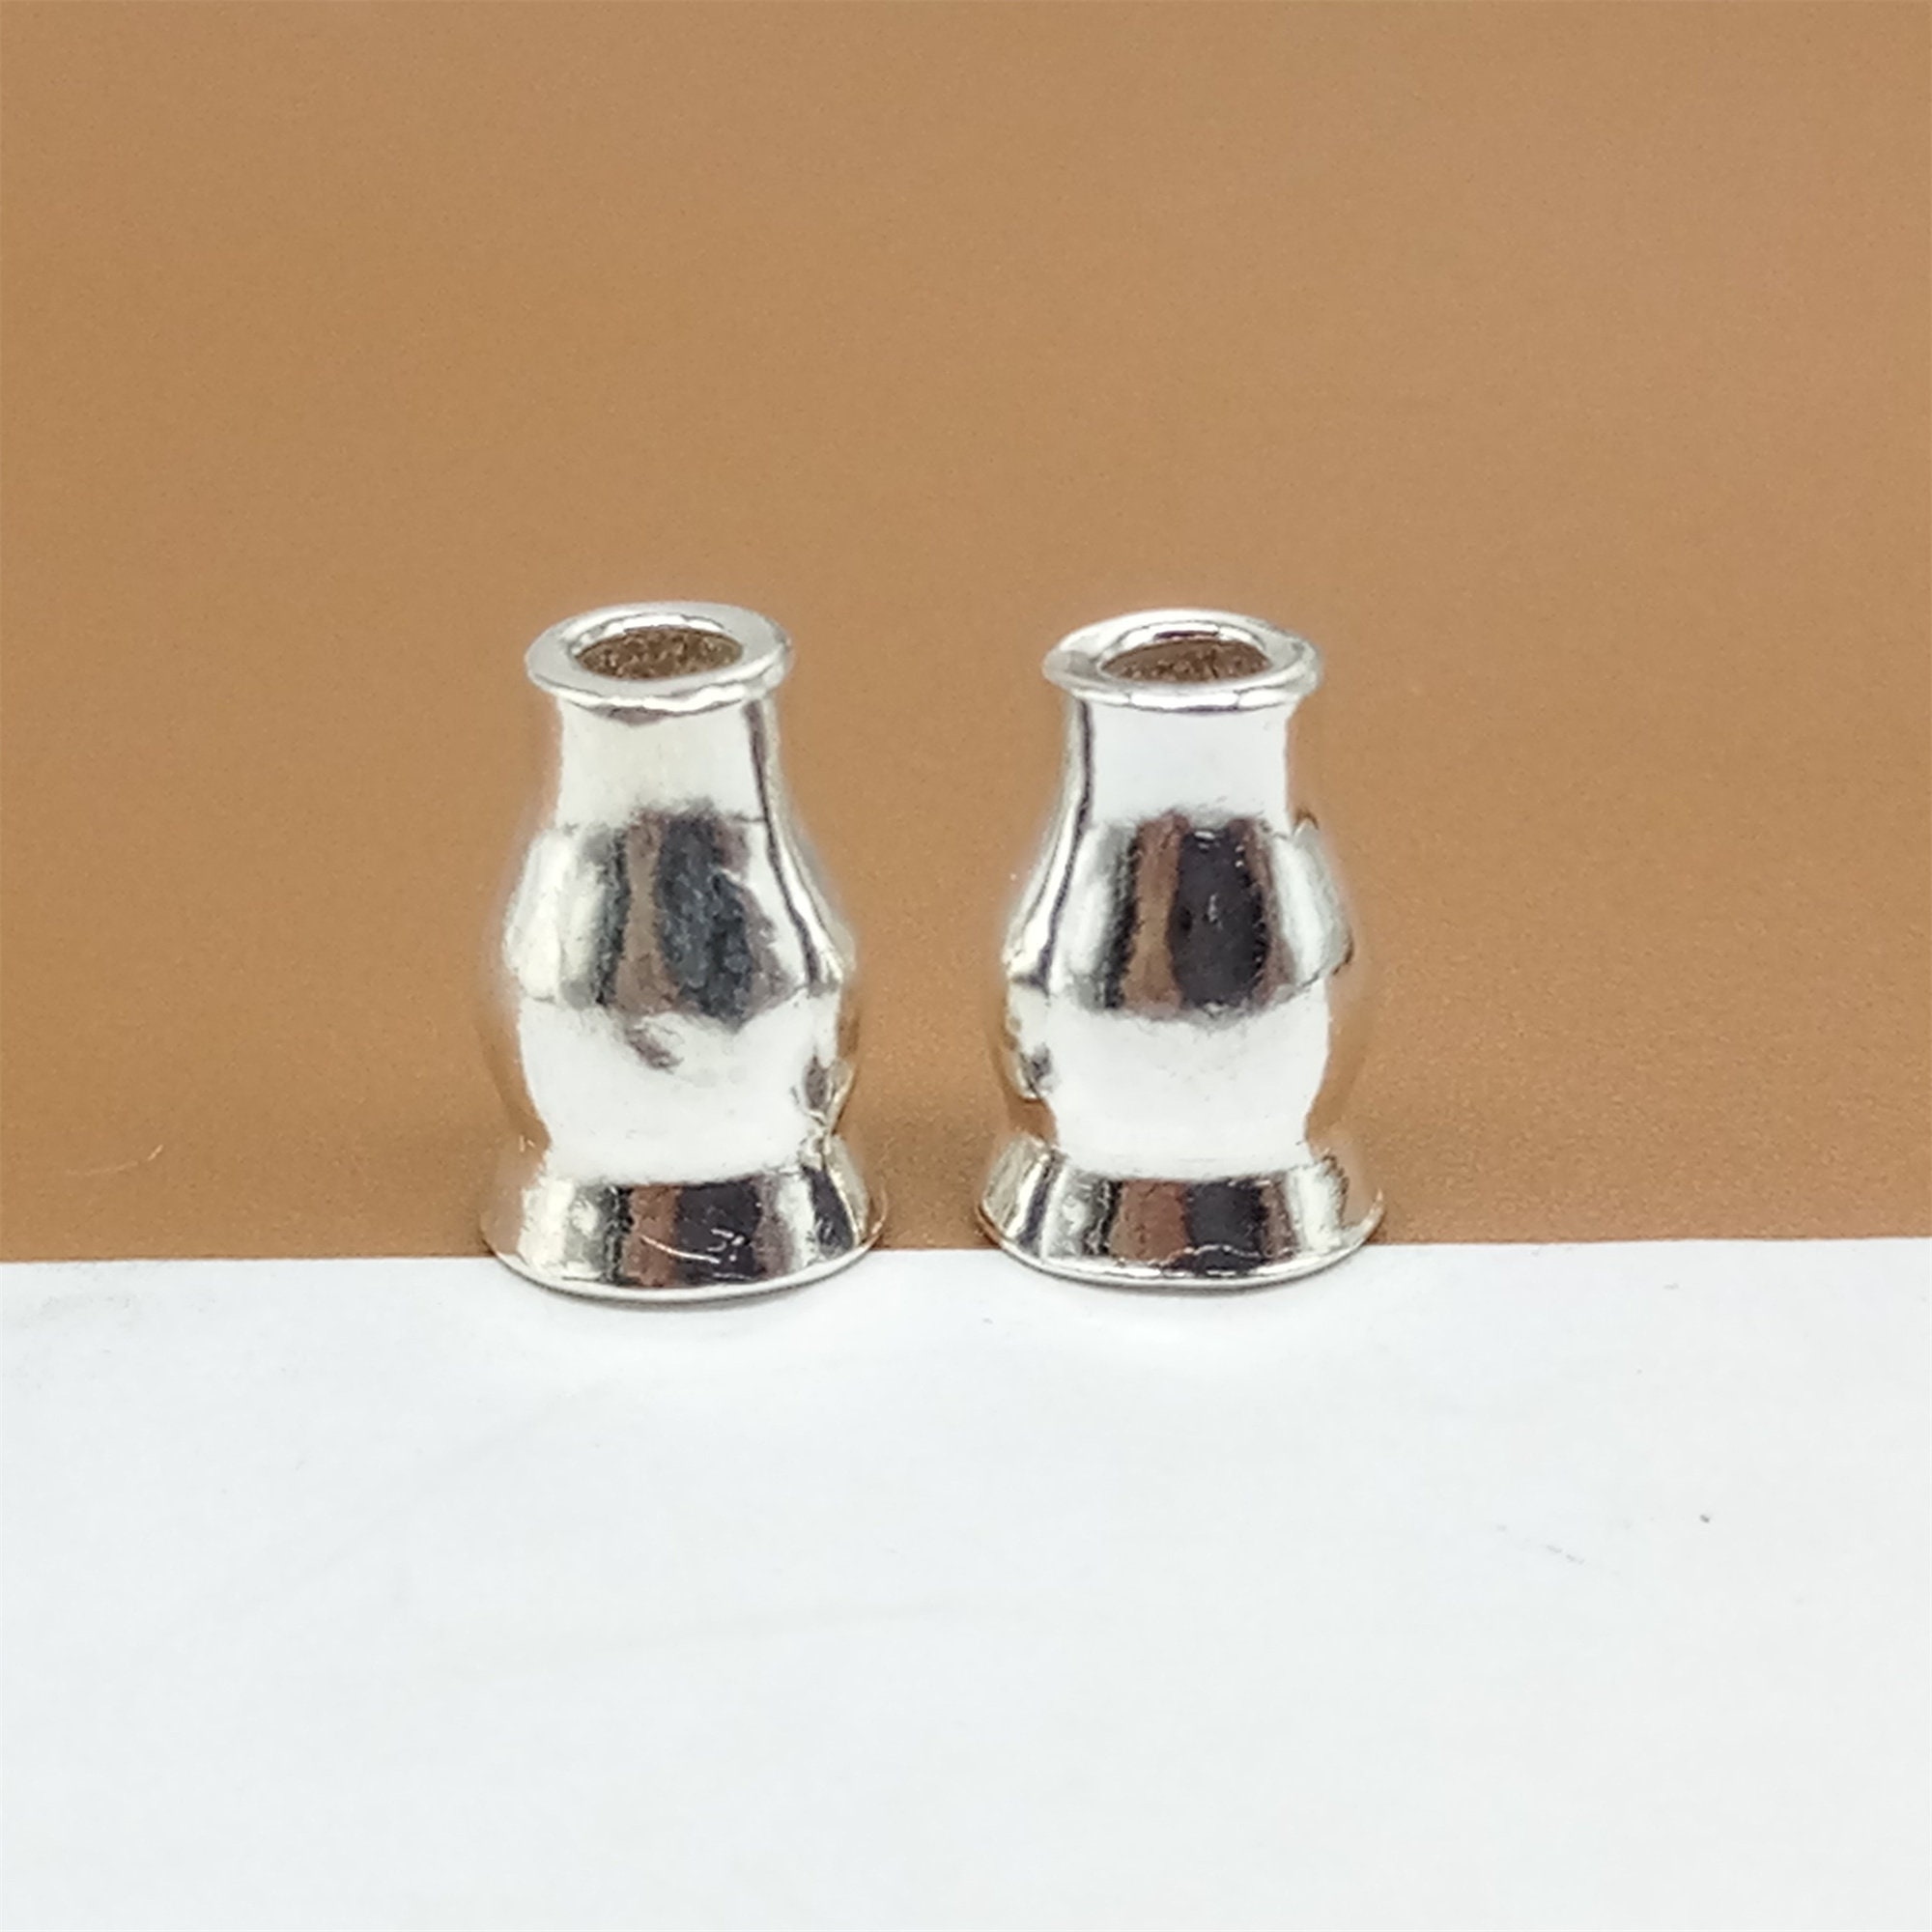 Sterling Silver Tassel Bead Cone, S925 Silver Beads Cap for